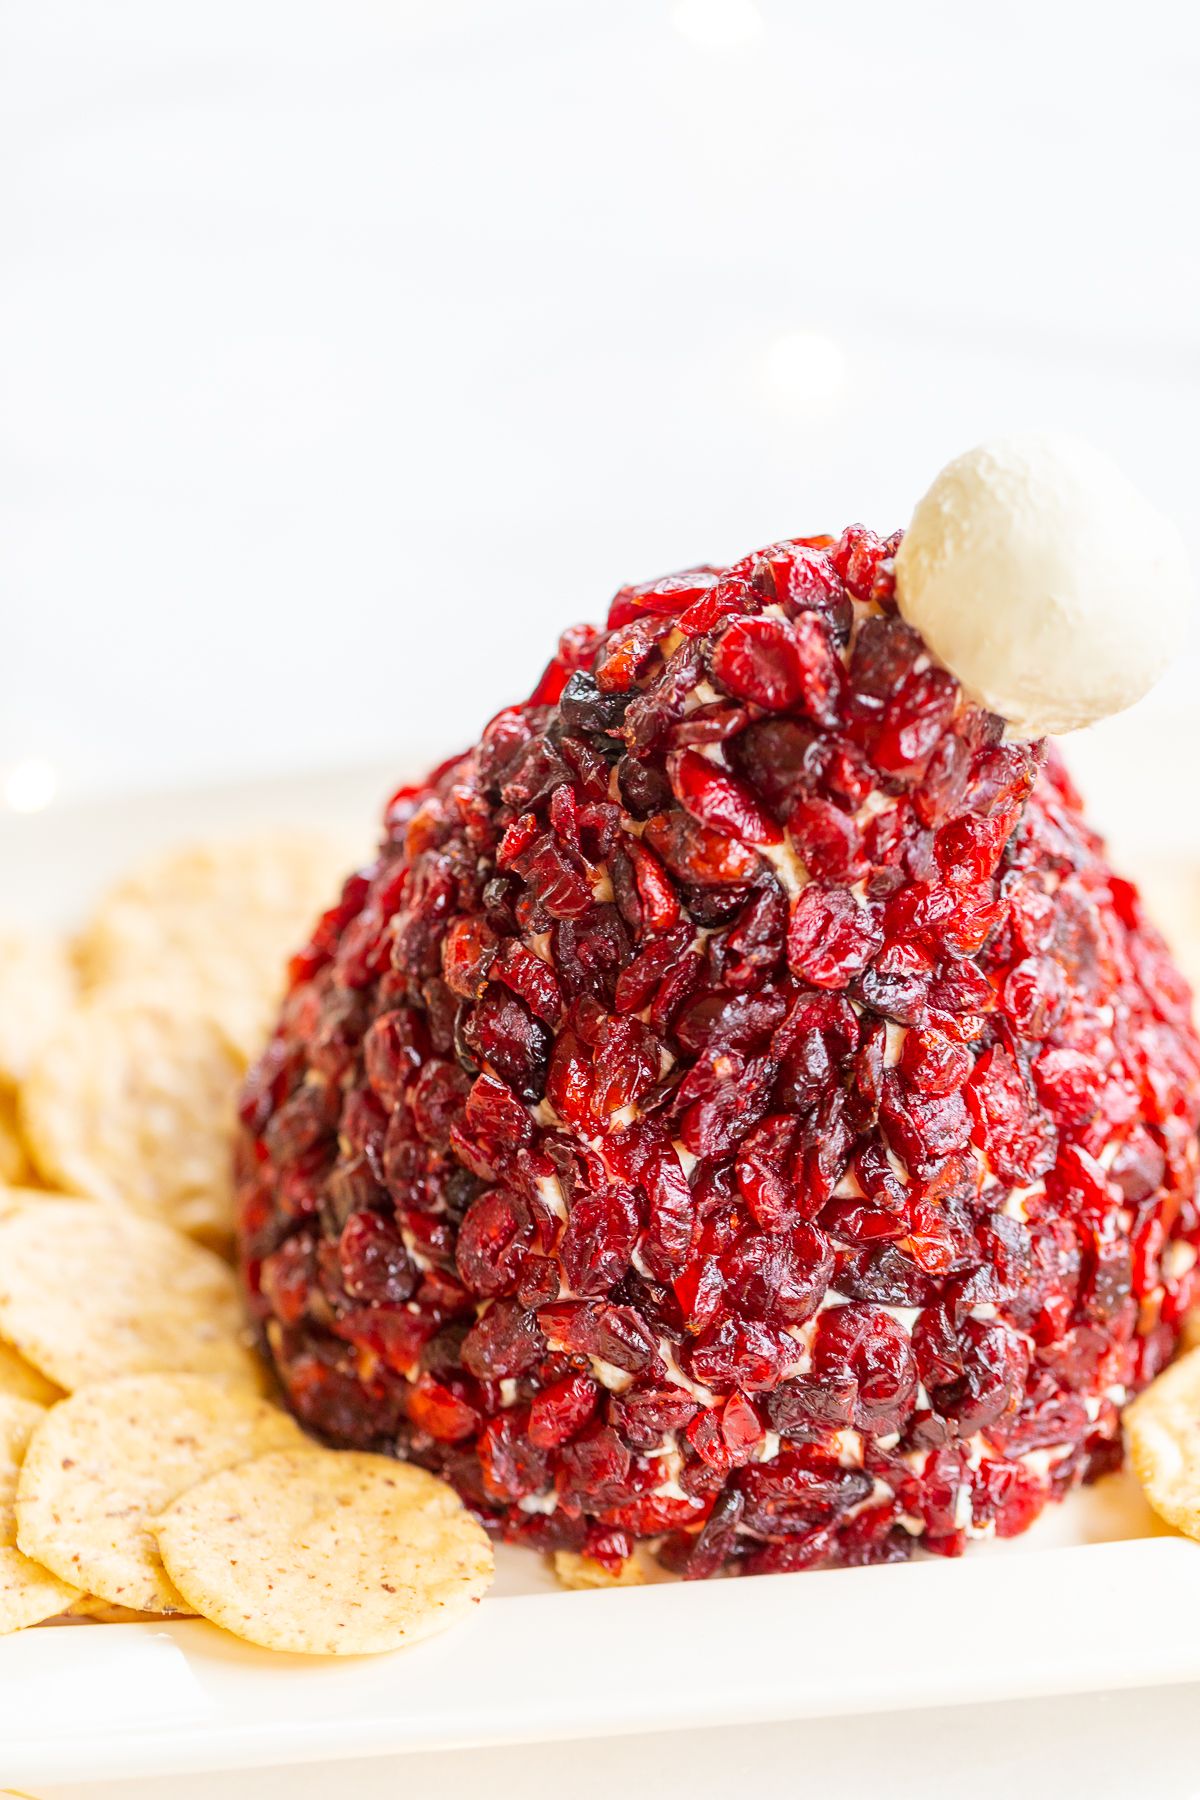 A cranberry cheeseball in the shape of a Santa's hat, on a plate surrounded by crackers.